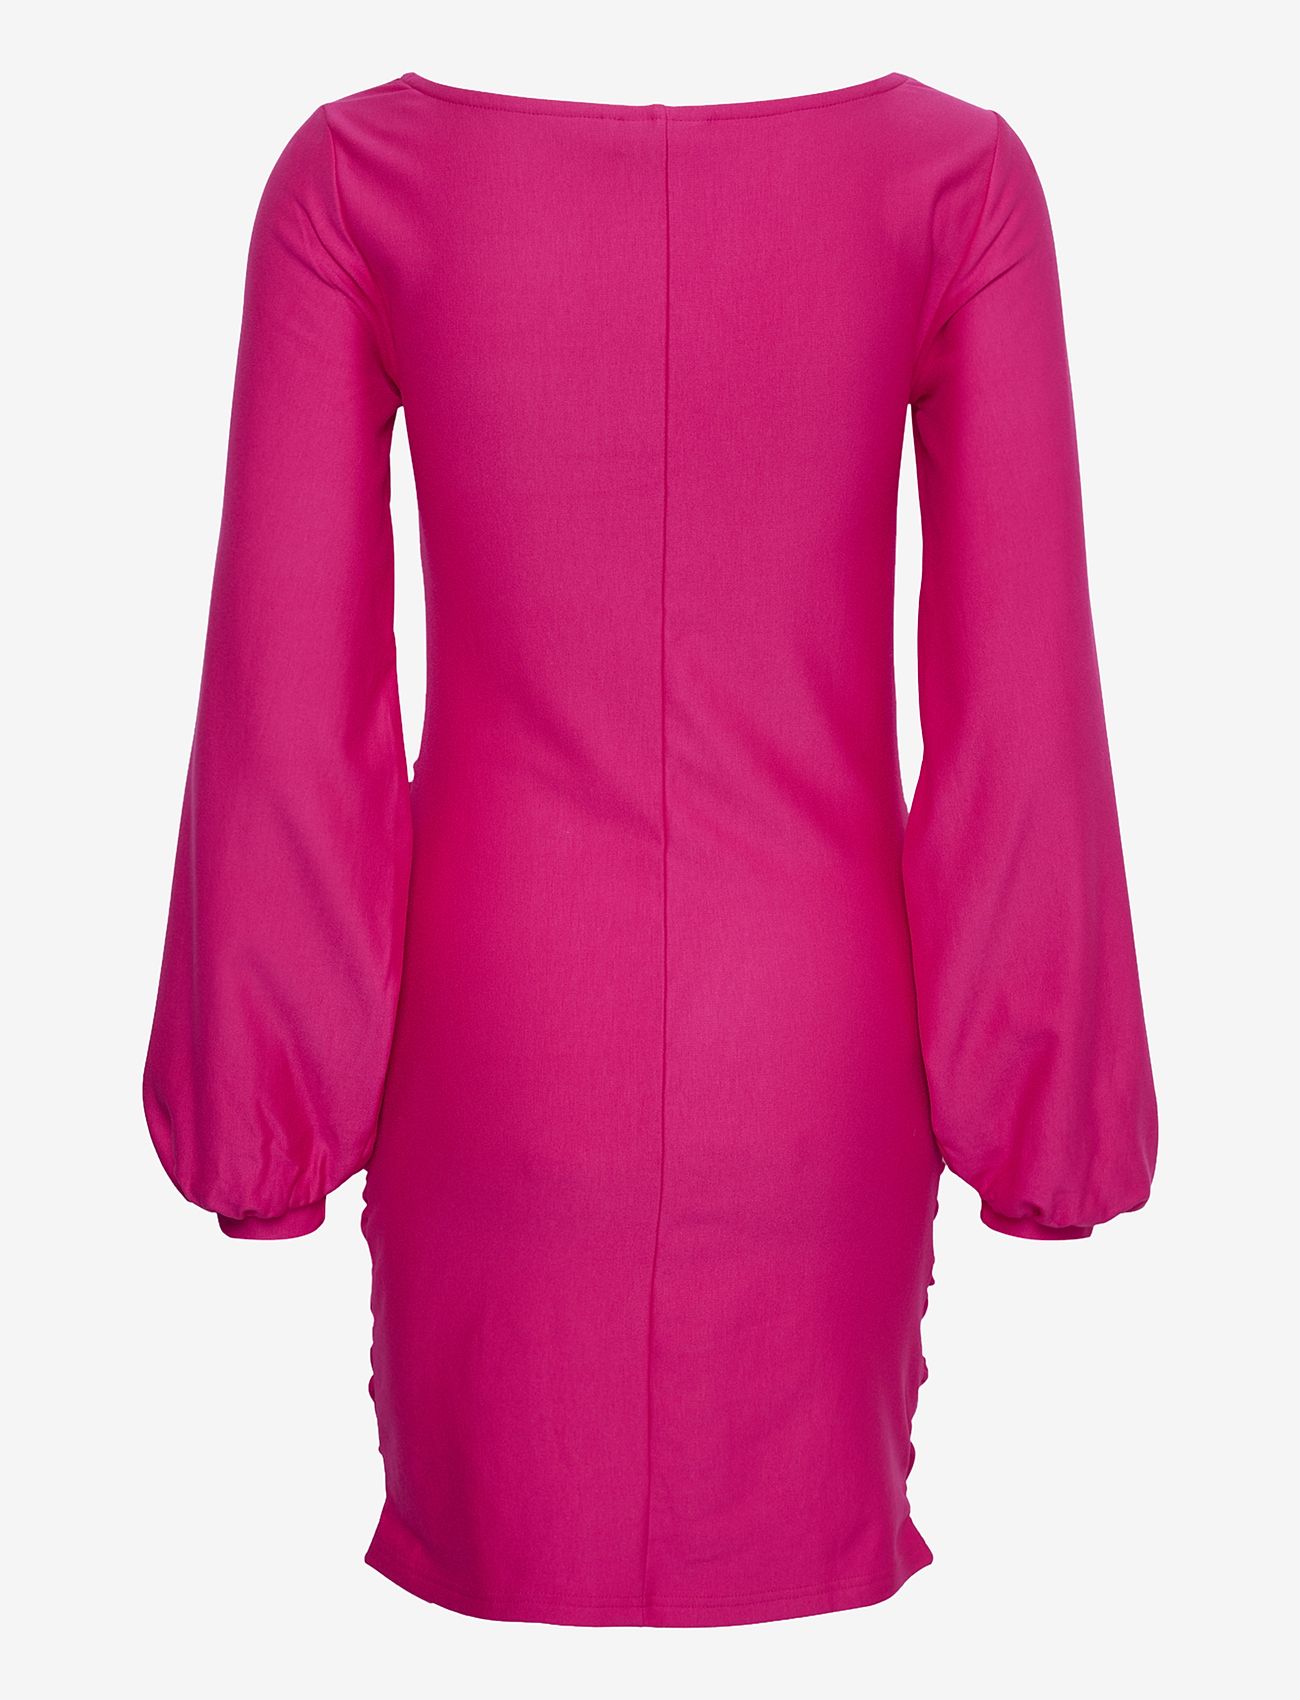 Gestuz - RifaGZ ls dress - party wear at outlet prices - pink peacock - 1